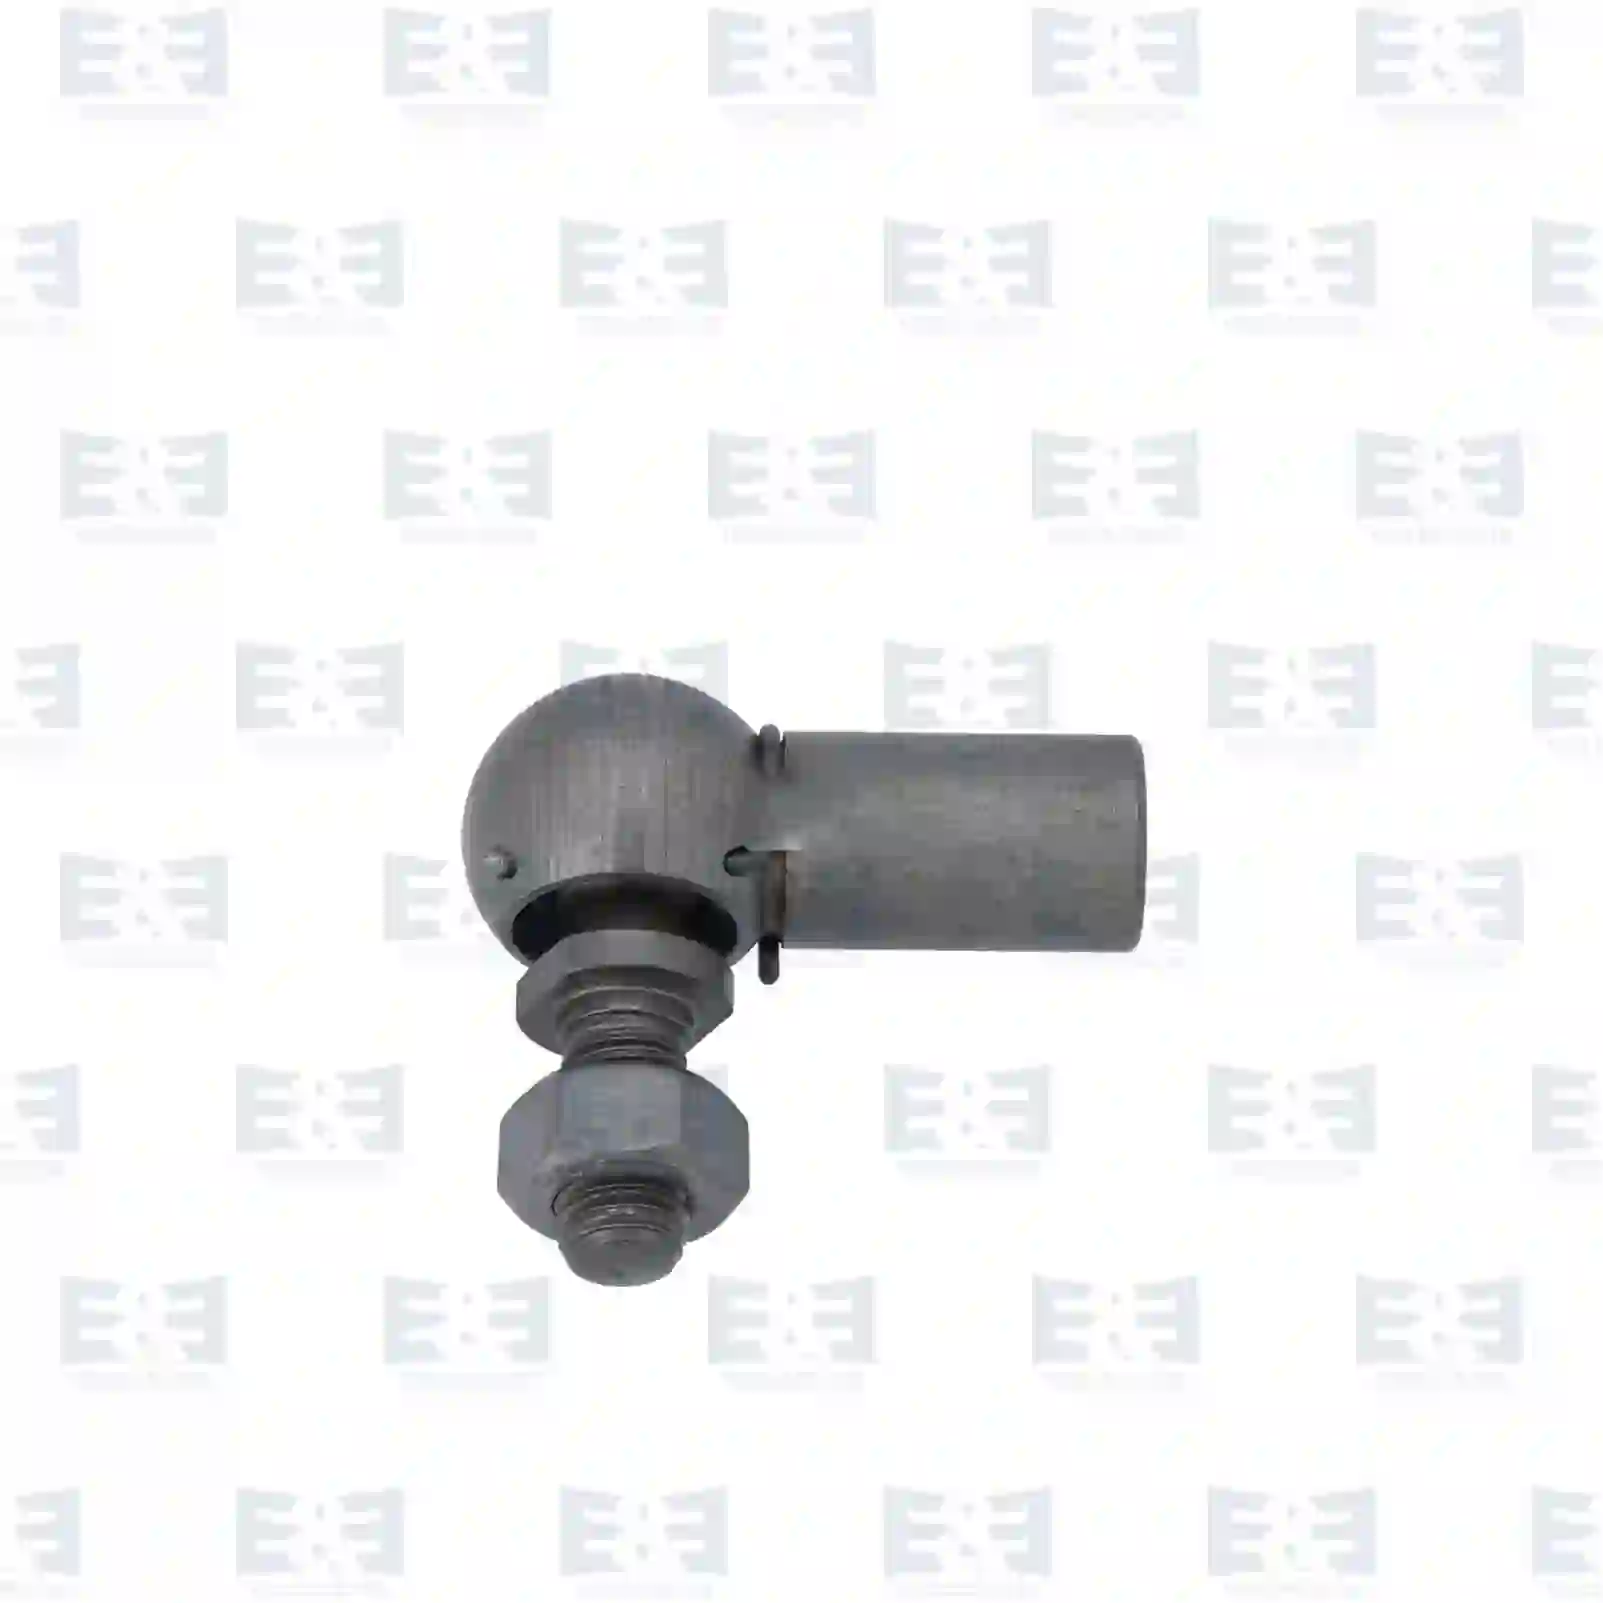  Angle joint || E&E Truck Spare Parts | Truck Spare Parts, Auotomotive Spare Parts